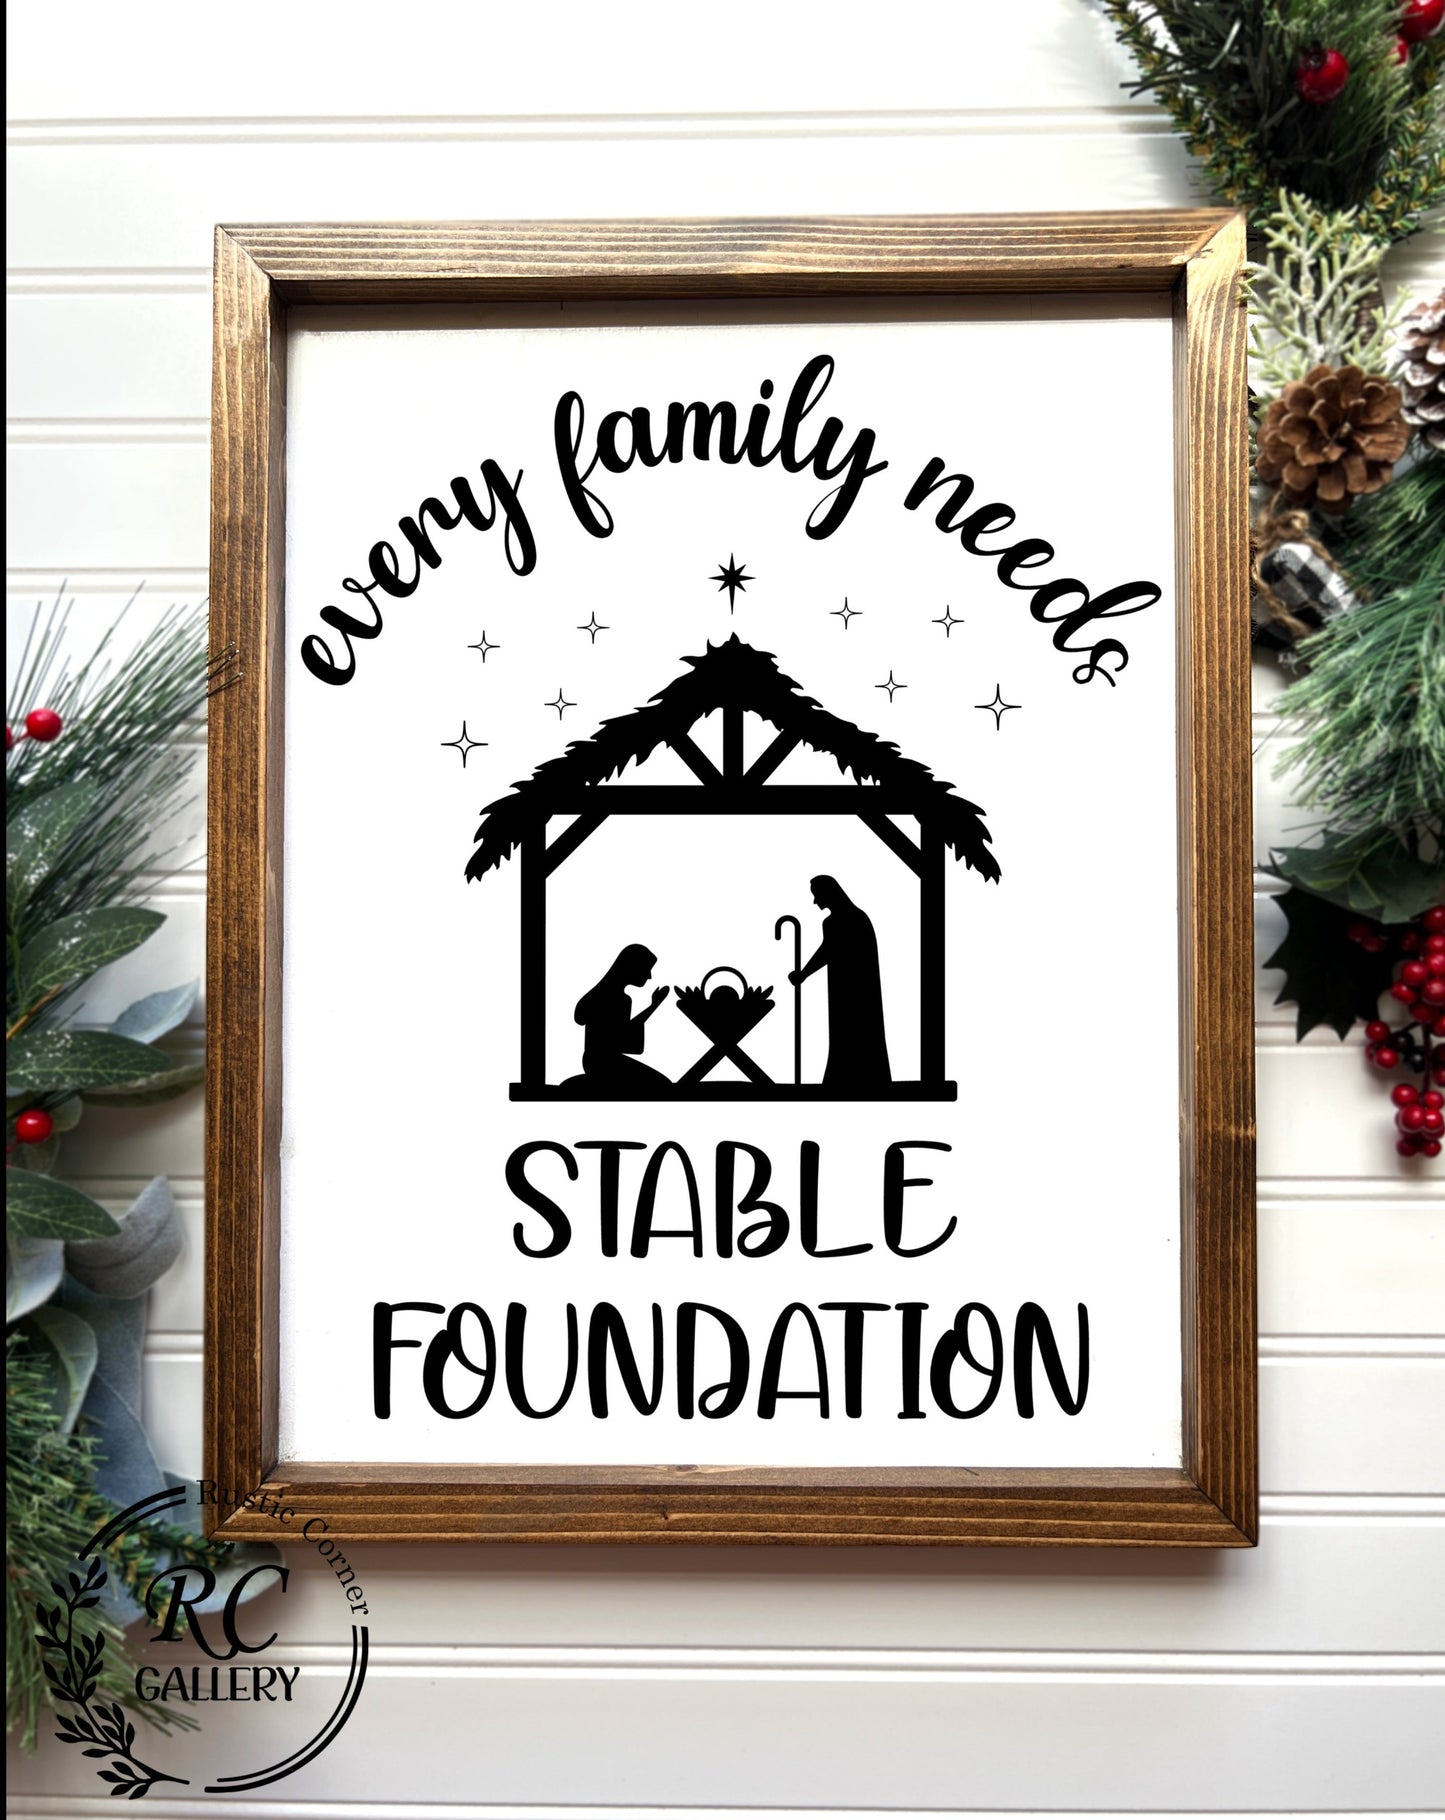 Every family needs stable foundation, Christmas wood sign.